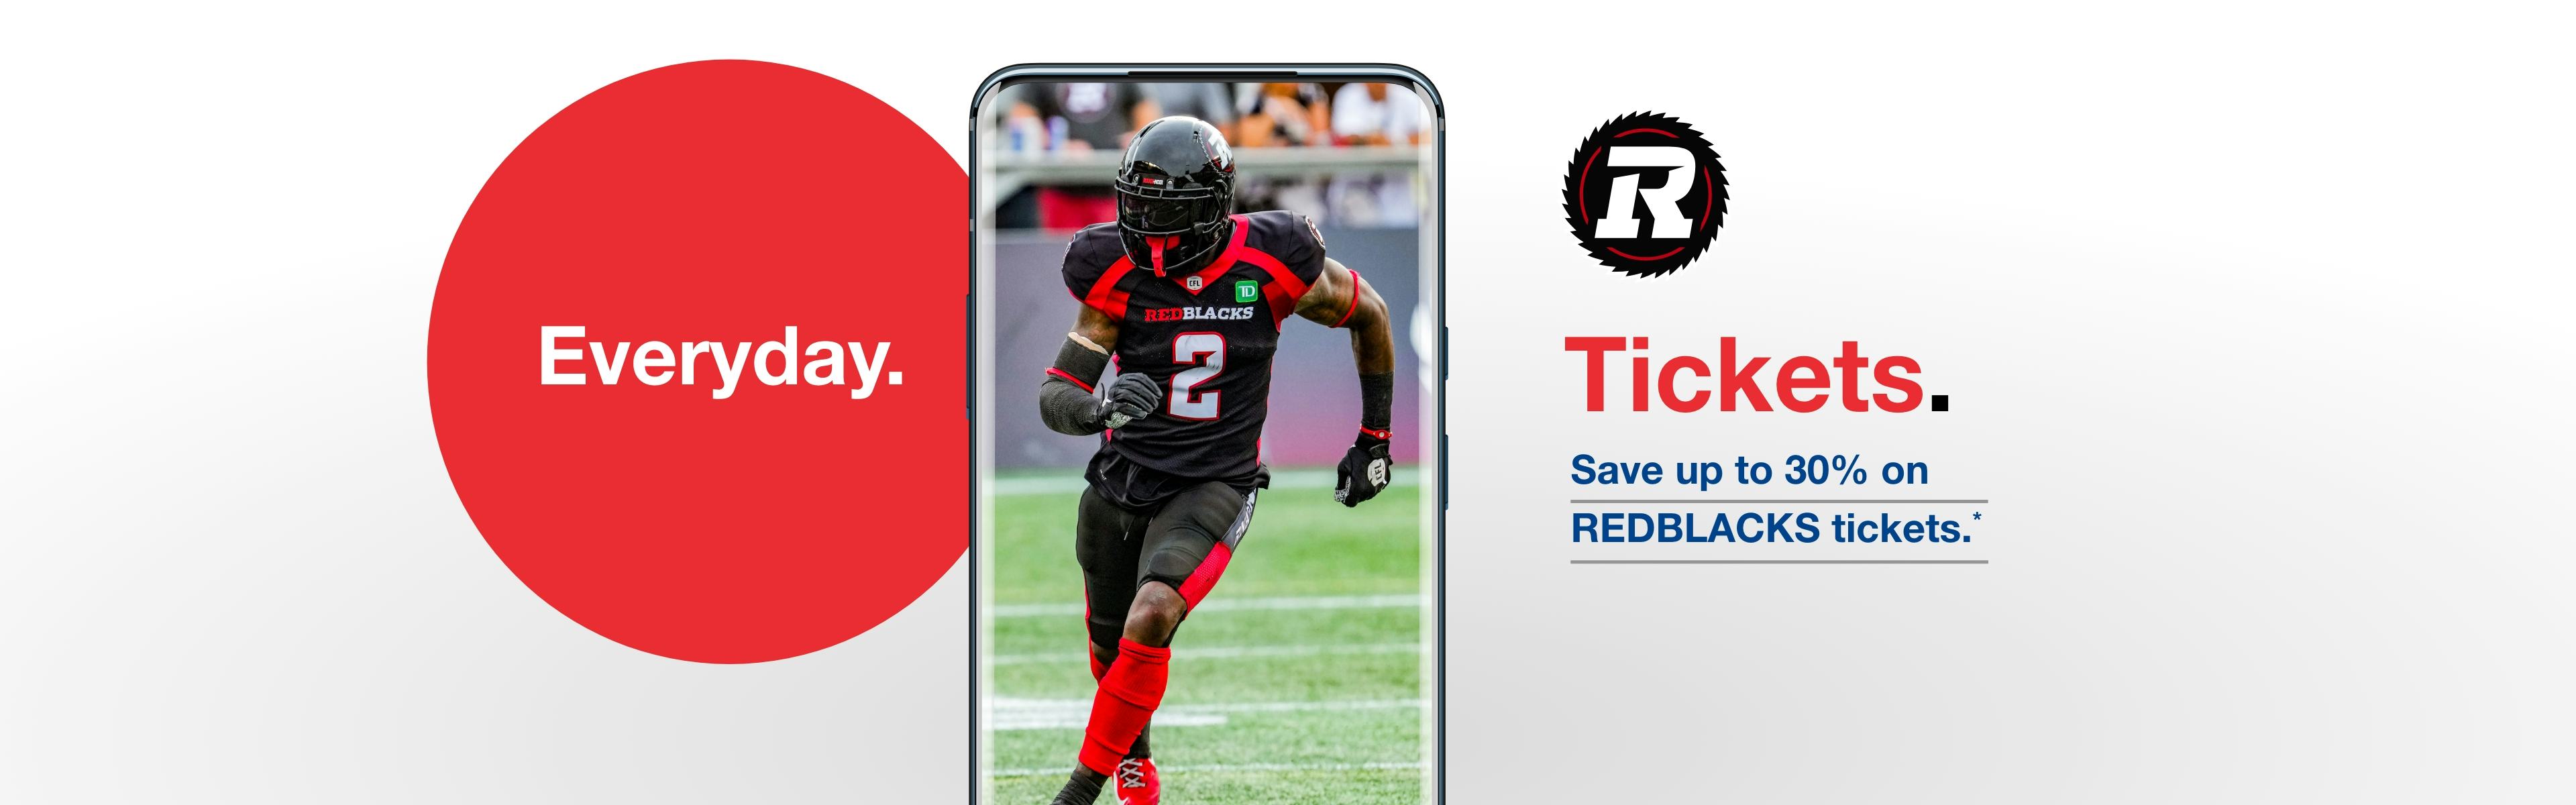 Everyday. Tickets. Save up to 30% on REDBLACKS tickets.*